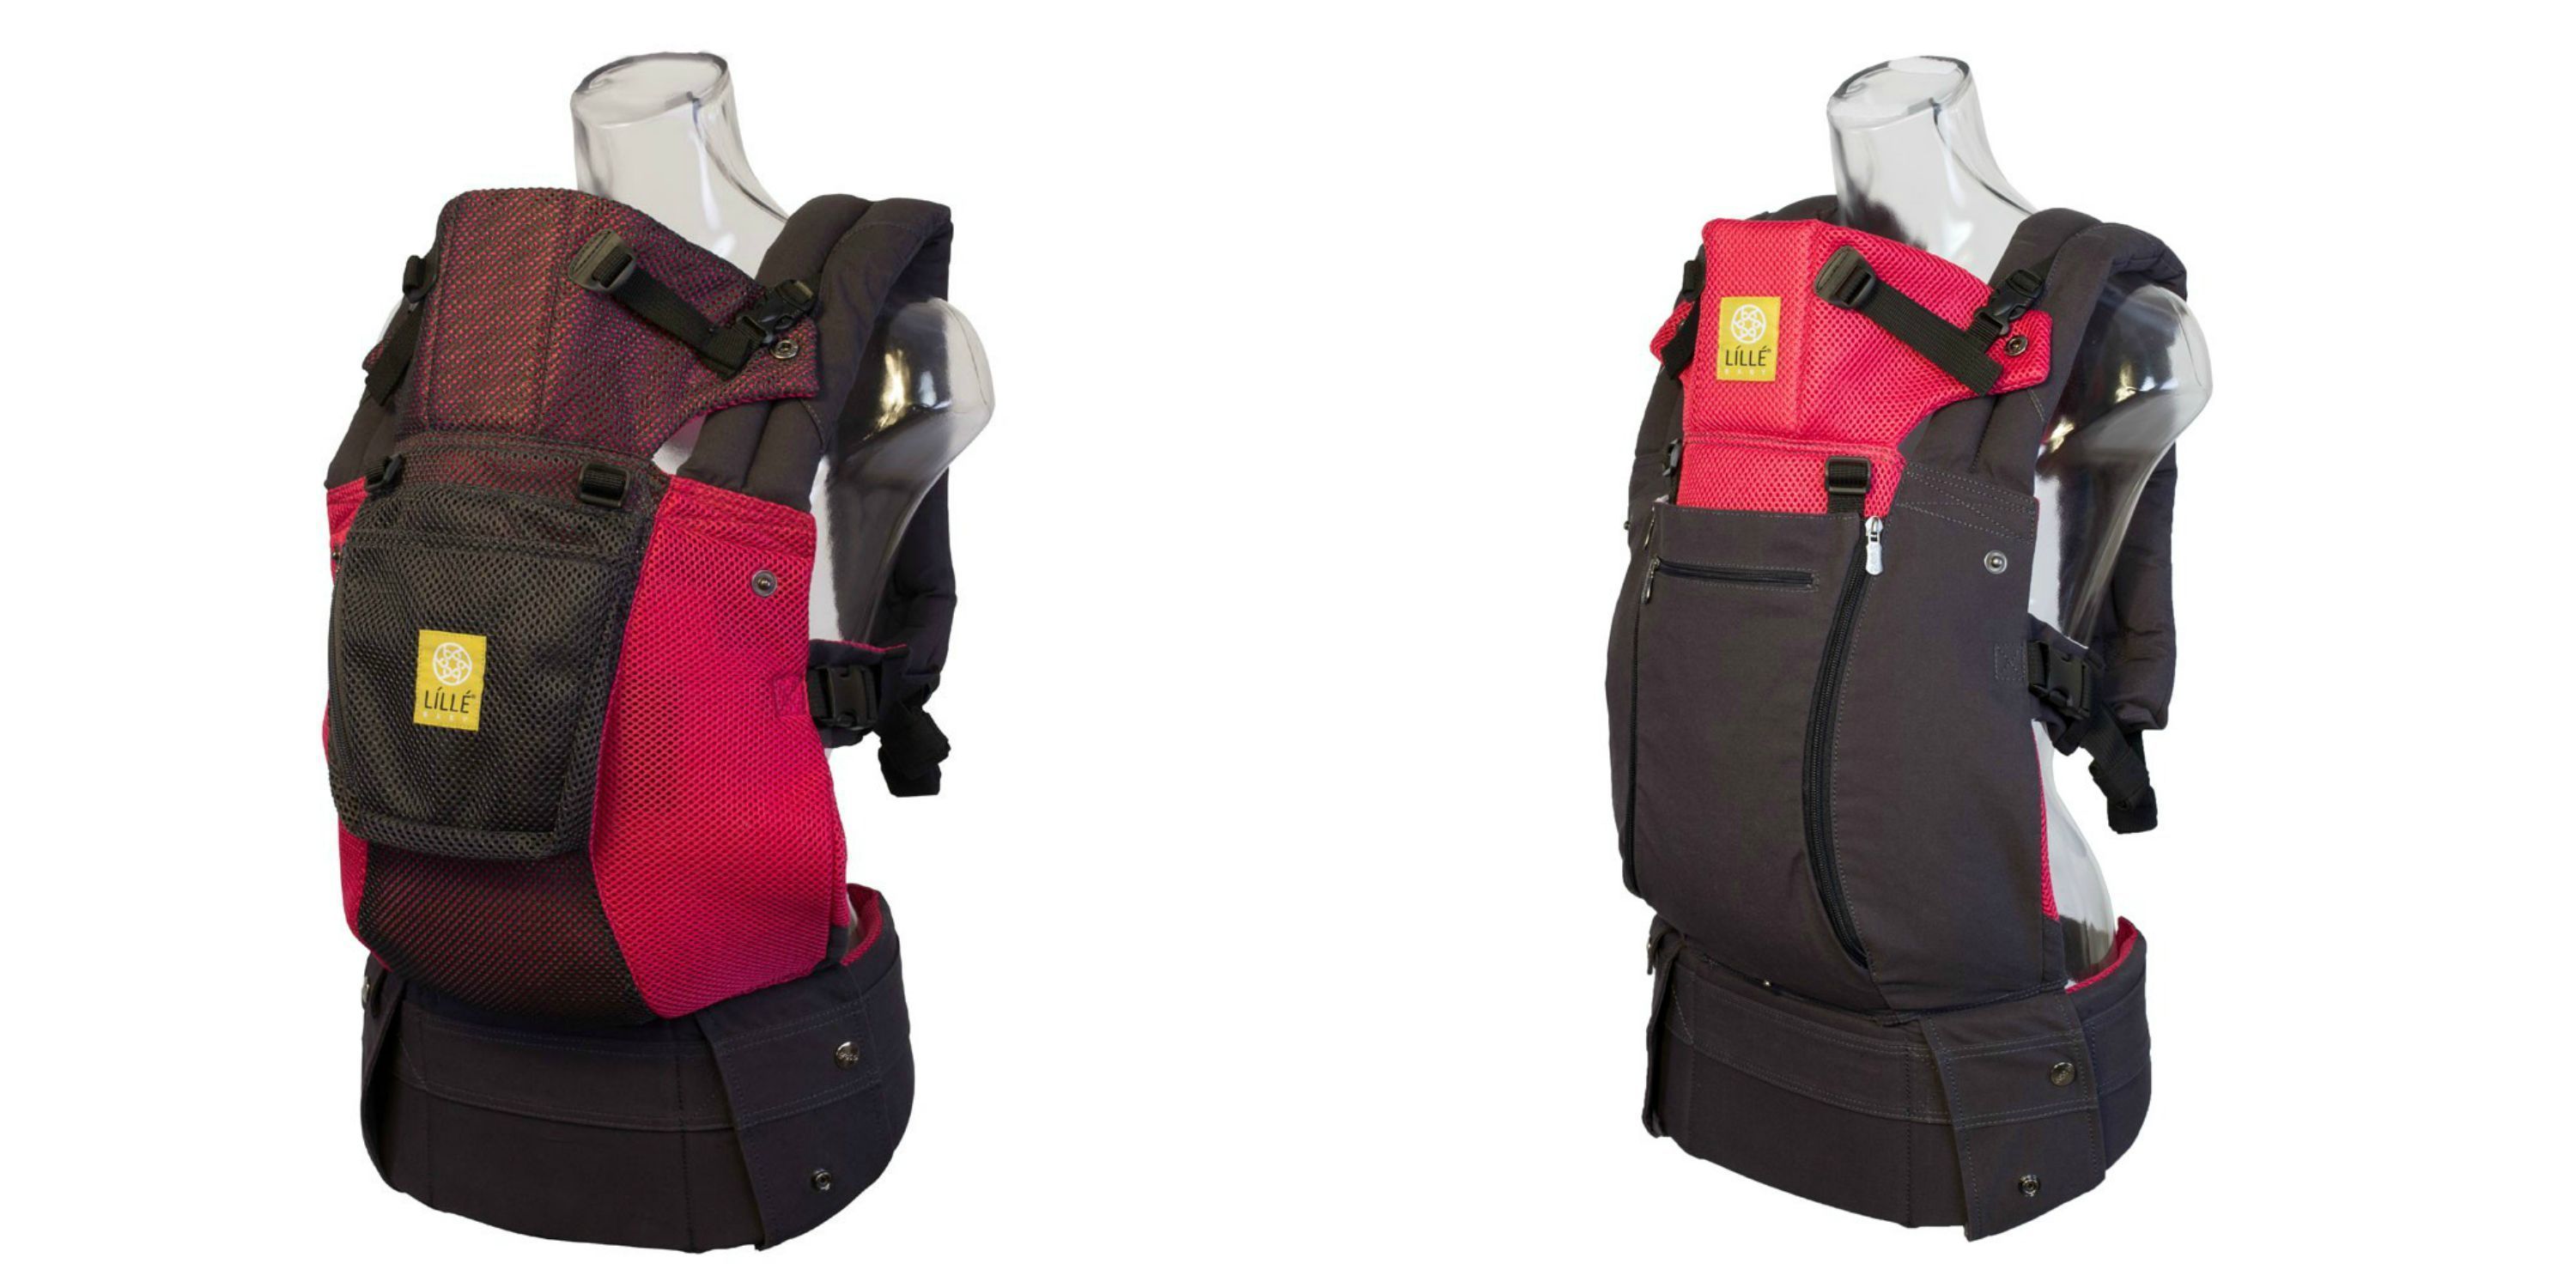 Which LÍLLÉbaby Carrier to Love: COMPLETE AirFlow vs. COMPLETE All Seasons